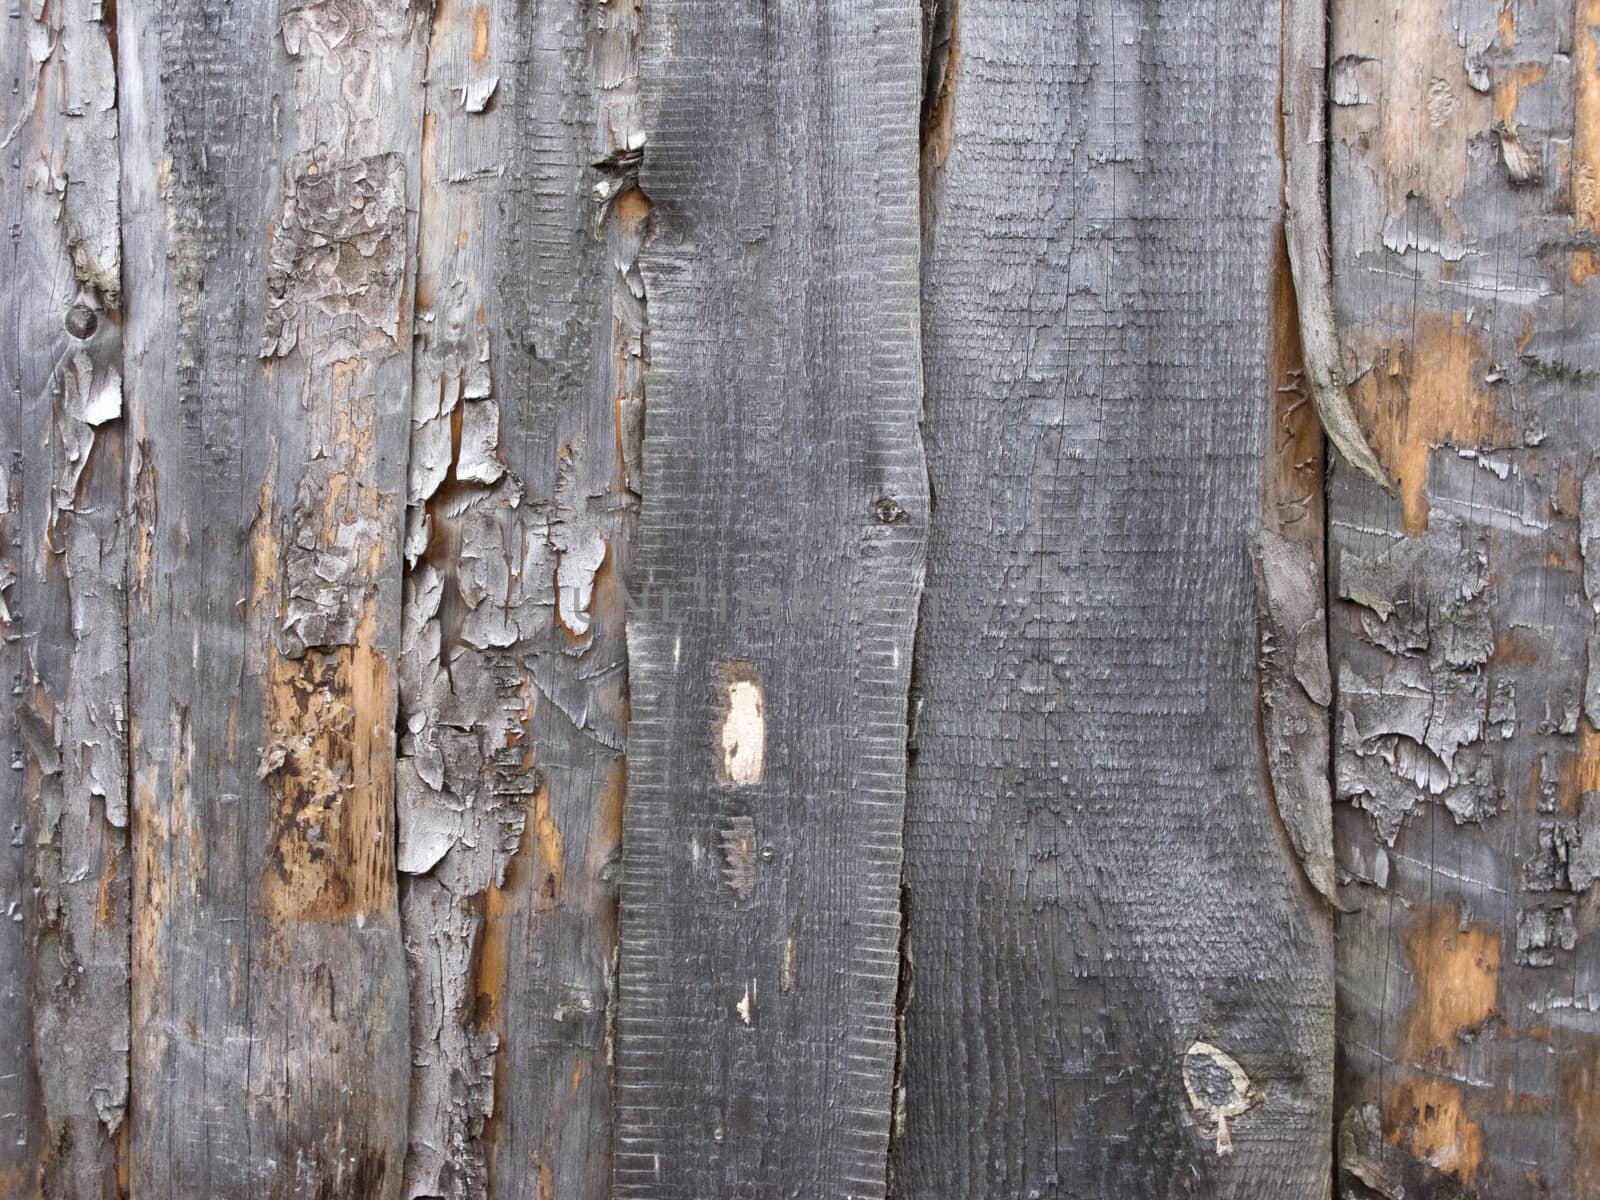 Rough wooden background with bark by wander